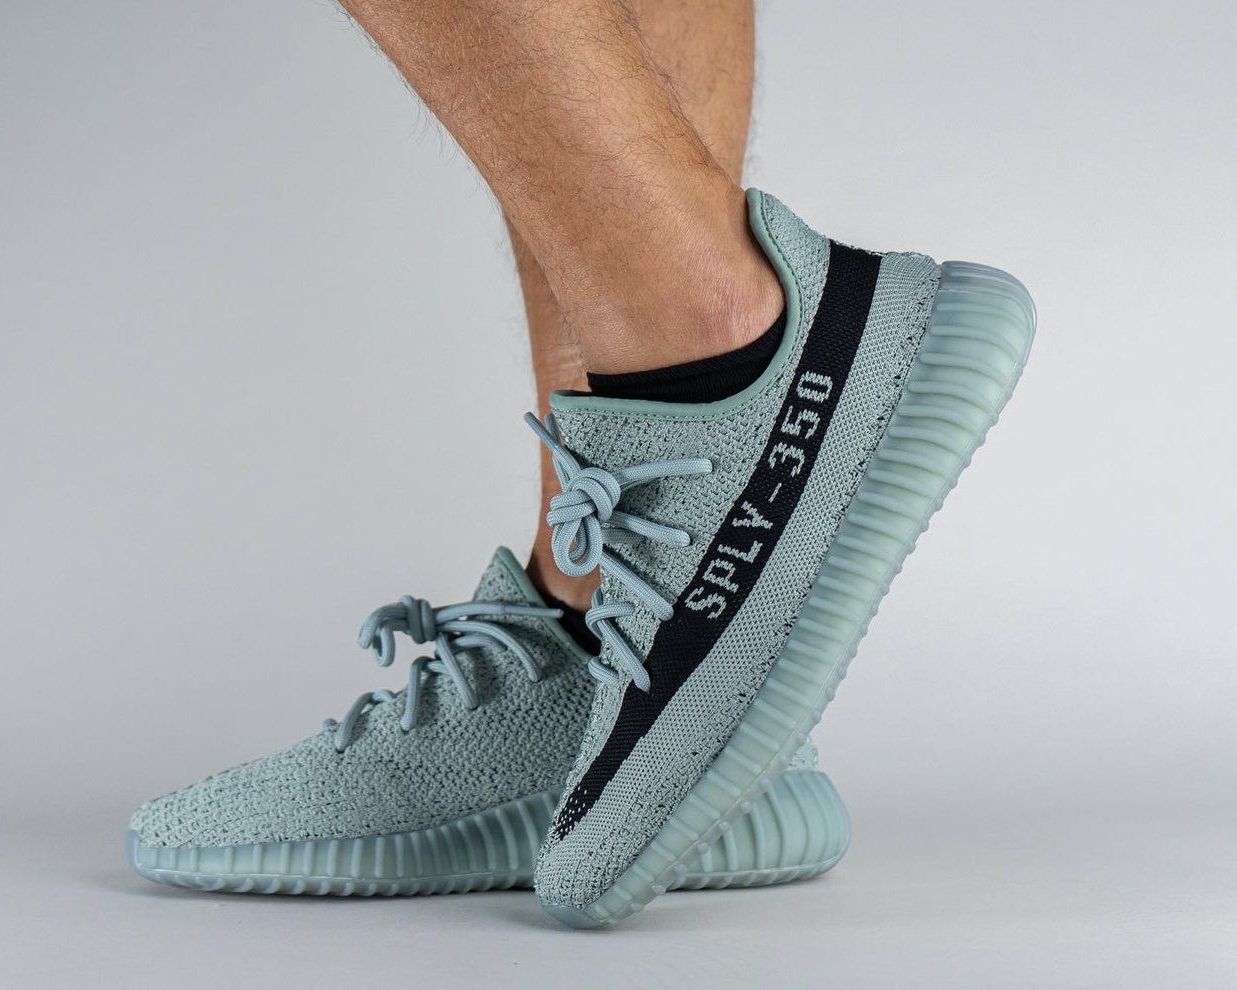 adidas Yeezy Boost 350 V2 Jade Ash HQ2060 Release Date On Feet 3